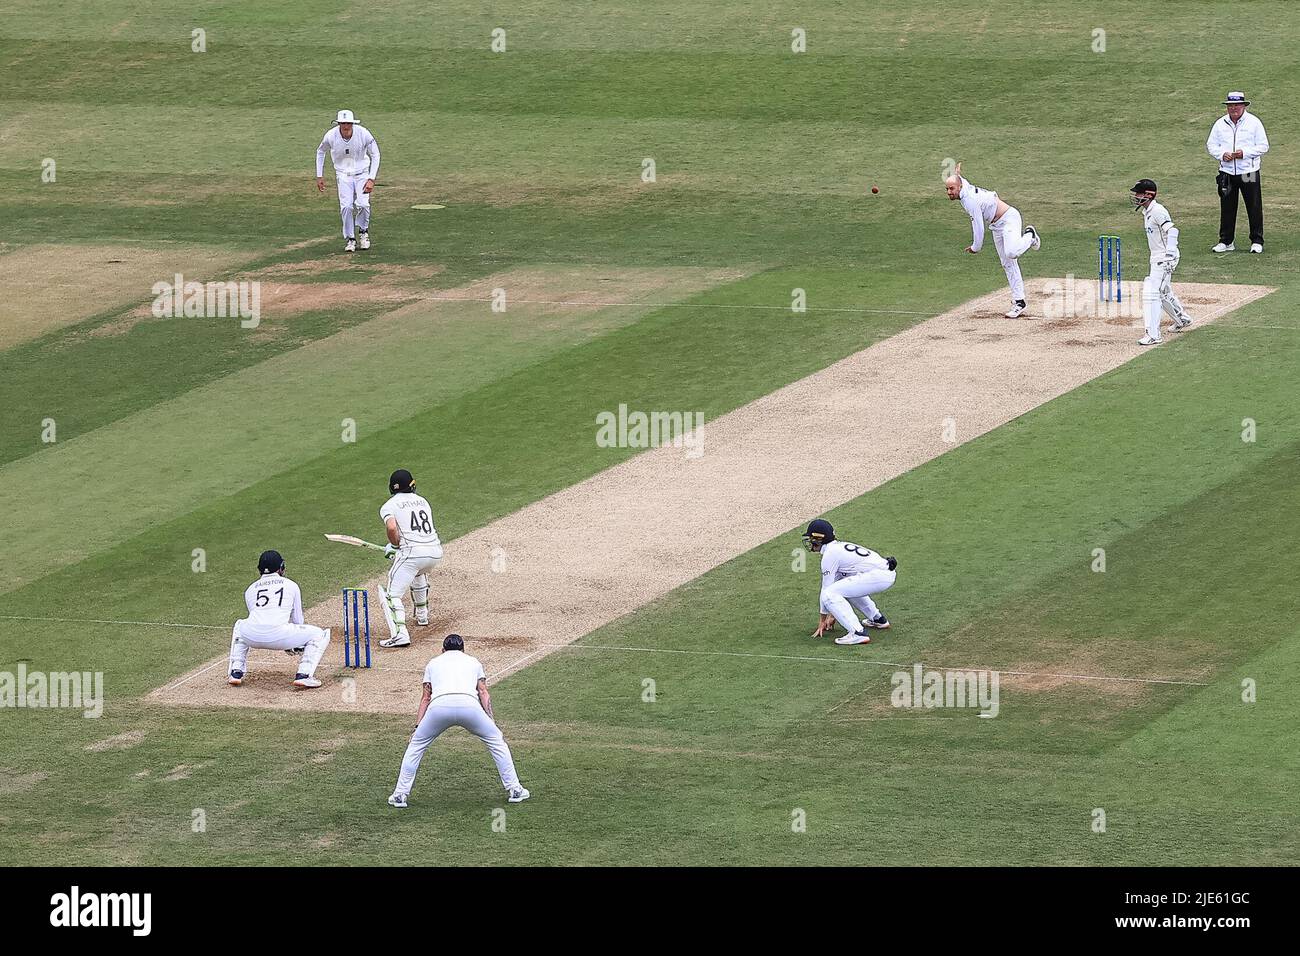 Leeds, UK. 25th June, 2022. Jack Leach of England delivers the ball to Tom Latham of New Zealand in Leeds, United Kingdom on 6/25/2022. (Photo by Mark Cosgrove/News Images/Sipa USA) Credit: Sipa USA/Alamy Live News Stock Photo